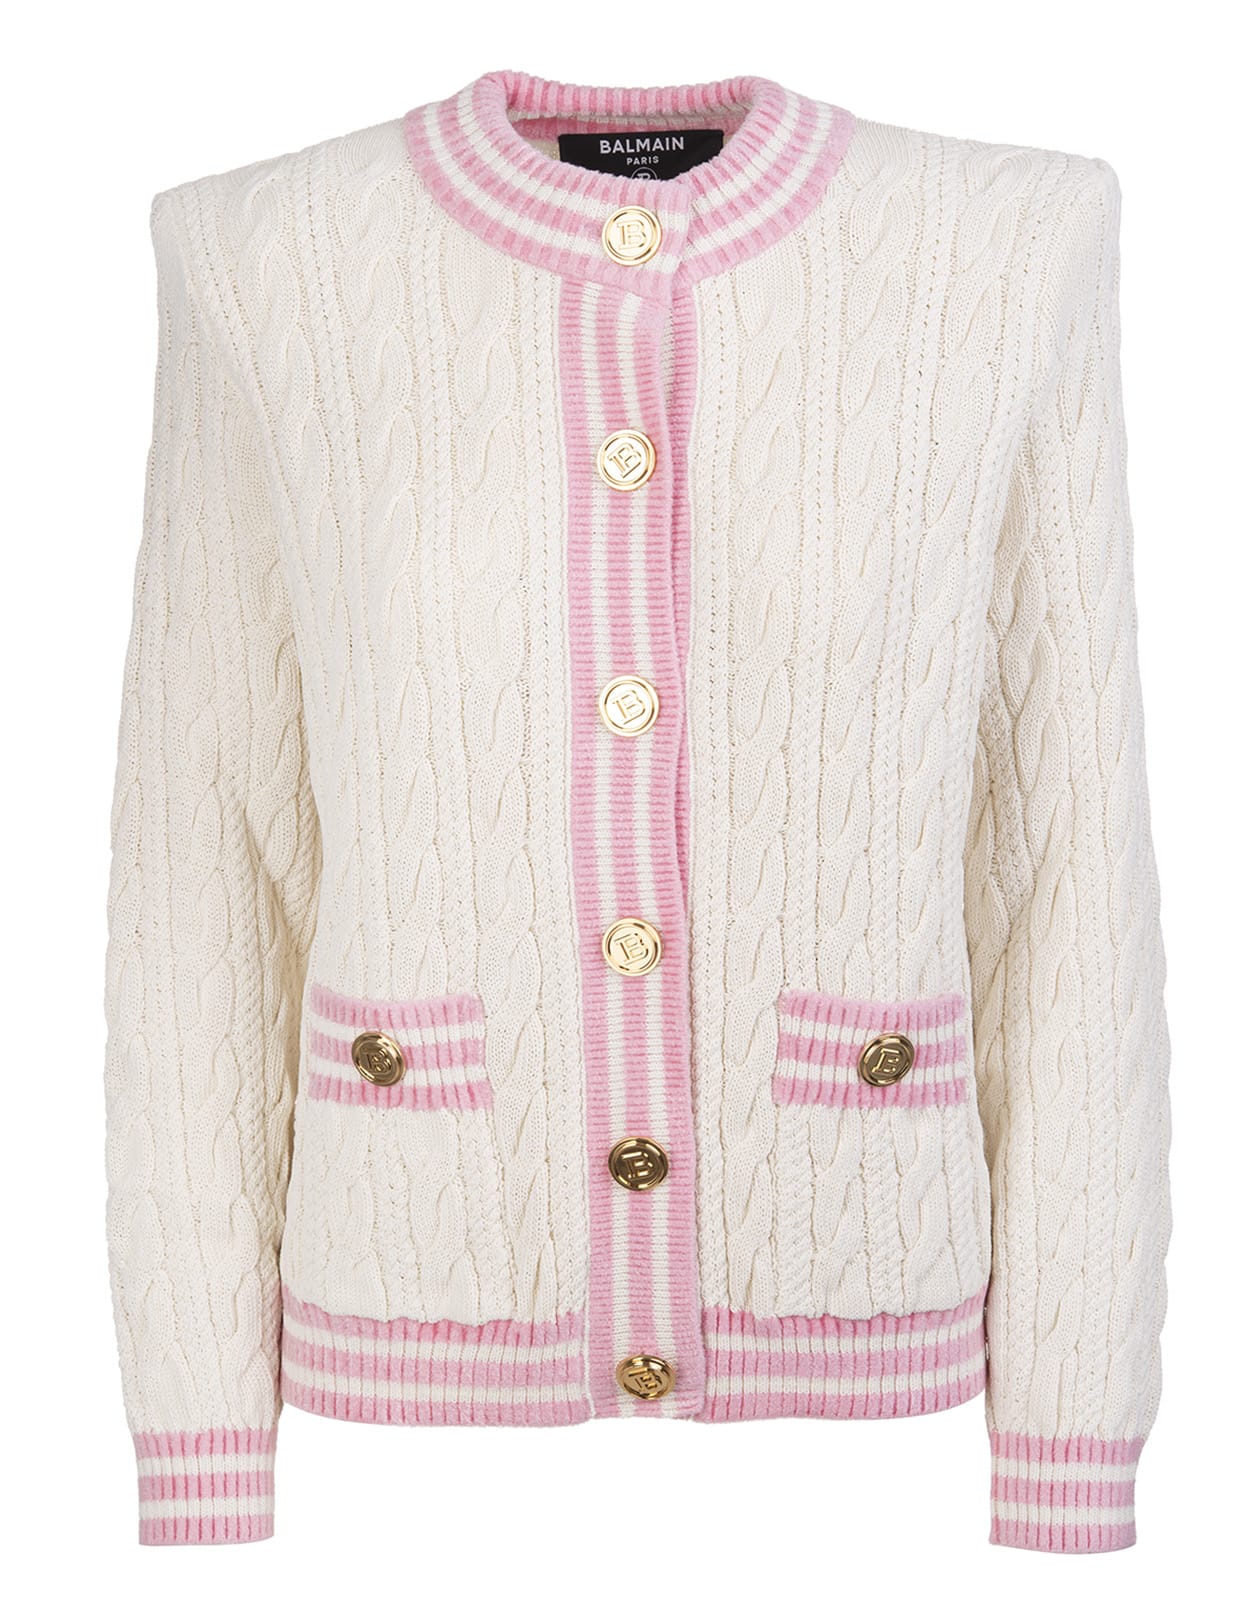 Balmain Woman White Cardigan With Pink Profiles And Gold Embossed Buttons